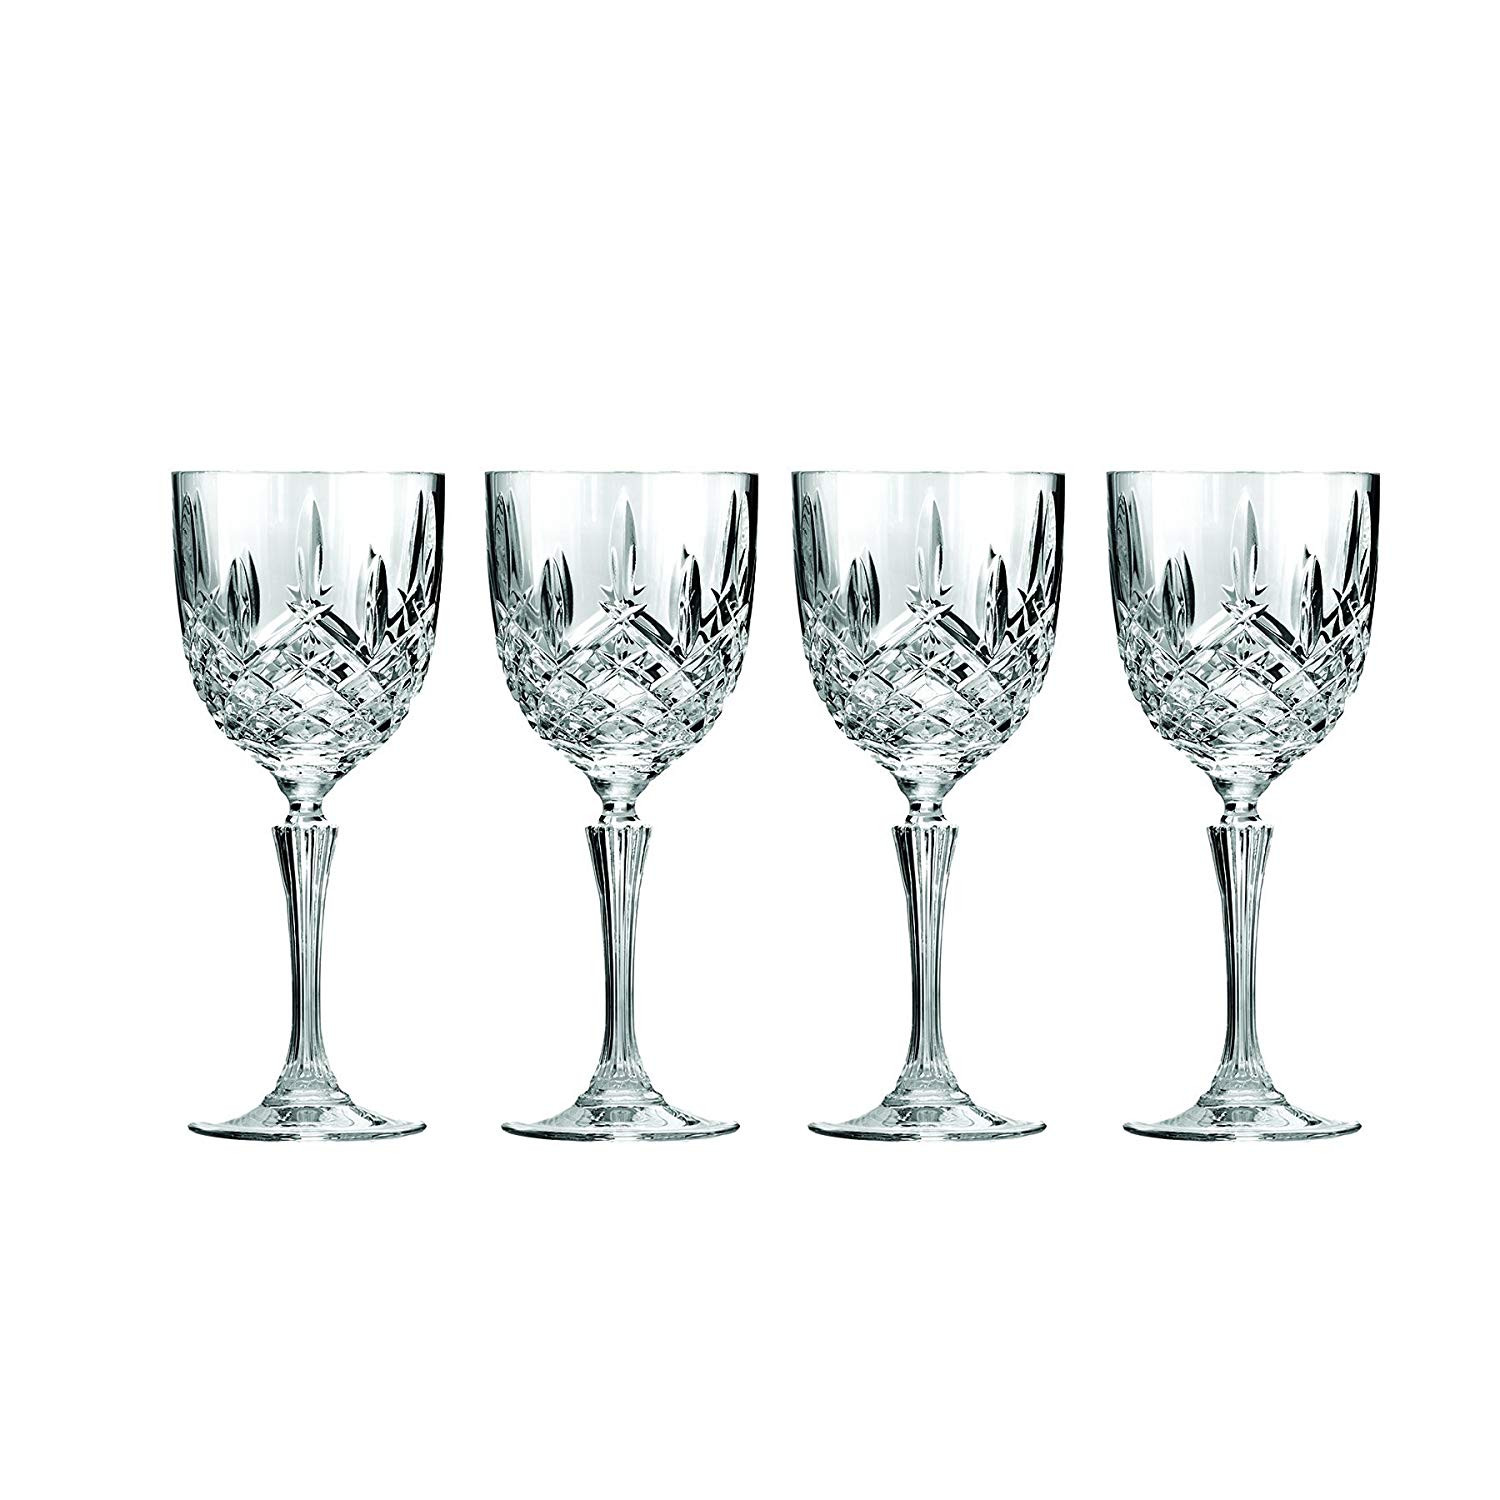 18 attractive Marquis by Waterford Vase Sparkle 2024 free download marquis by waterford vase sparkle of amazon com set of 4 marquis by waterford markham wine glasses with amazon com set of 4 marquis by waterford markham wine glasses beautifully designed sho